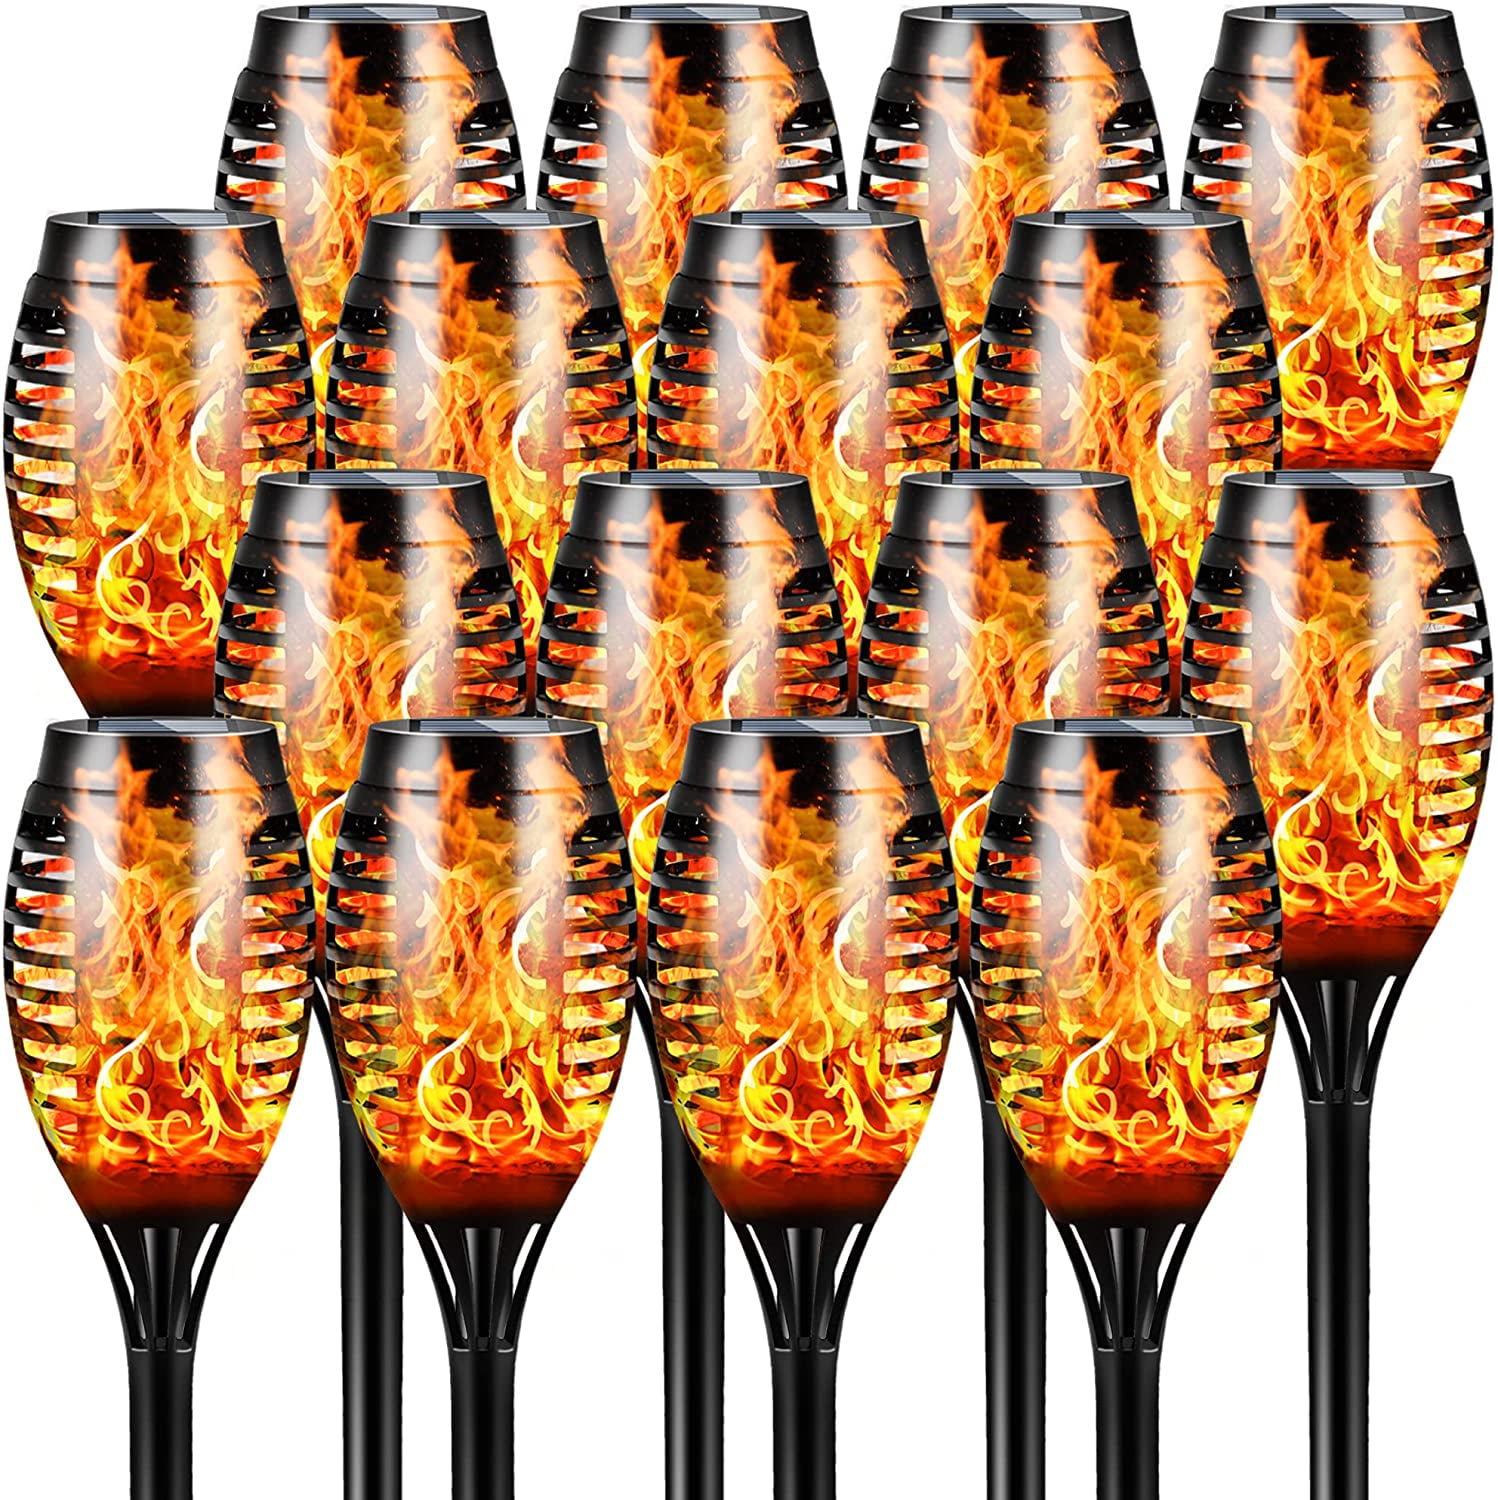 Pathway Patio 8 Packs 12LED Tiki Torch Solar Lights Outdoor Yard IP65 Waterproof Mini Solar Torch Light Auto On/Off for Garden Otdair Solar Torch Lights with Flickering Flame 